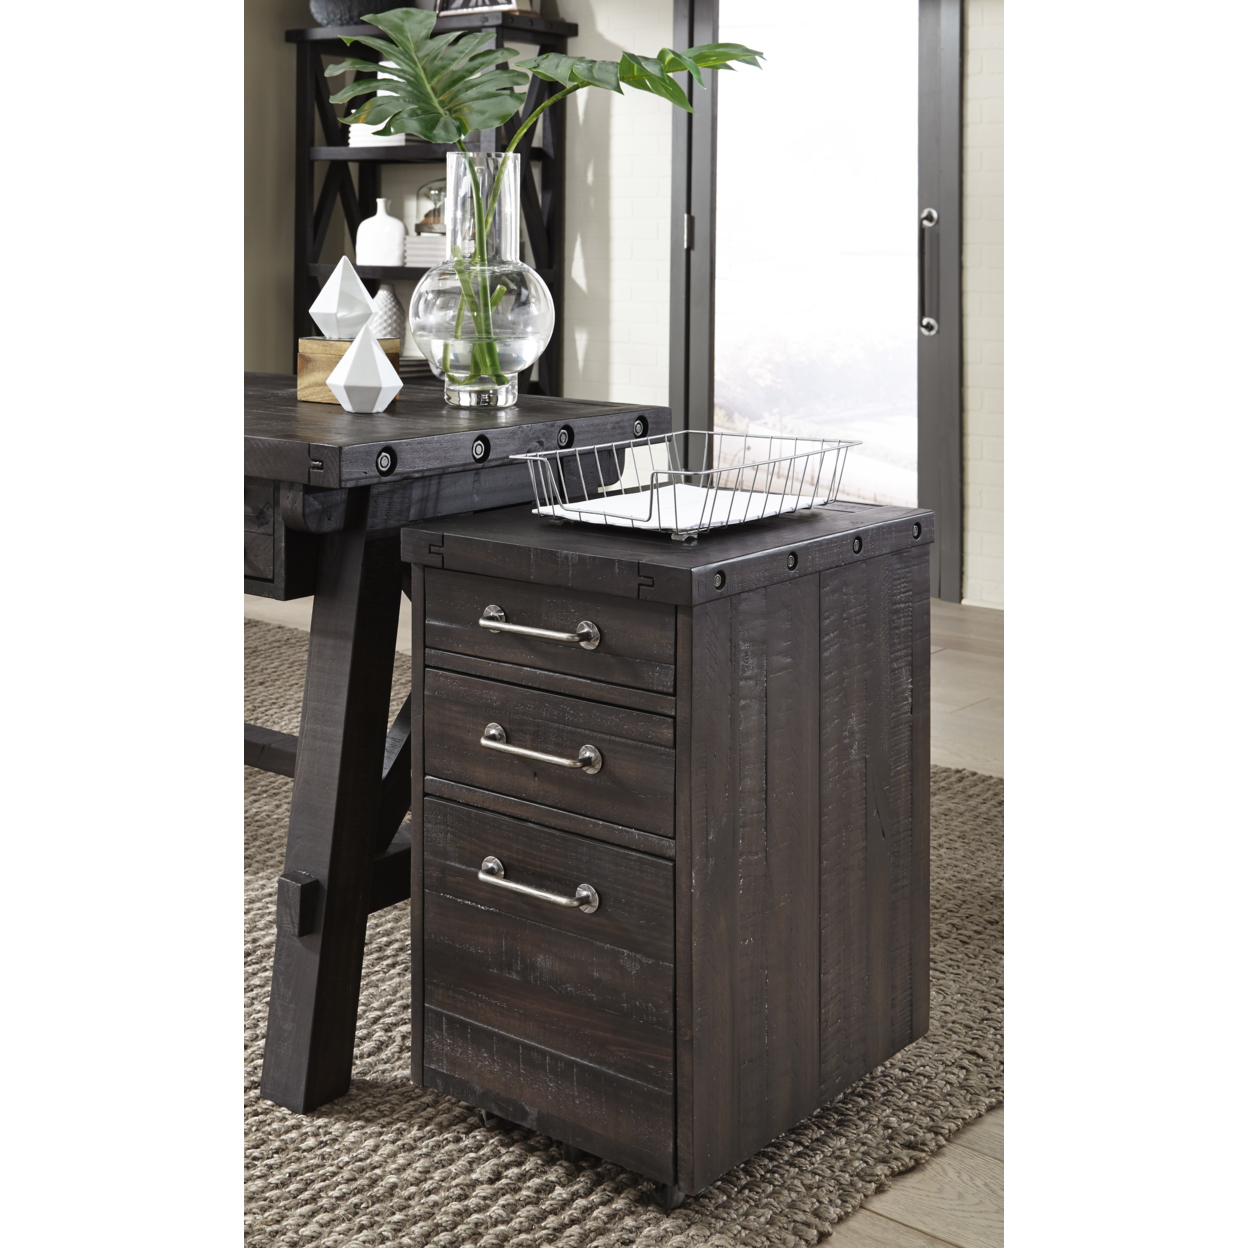 Three Drawers Solid Pine Wood File Cabinet With Rolling Casters, Cafe Brown- Saltoro Sherpi